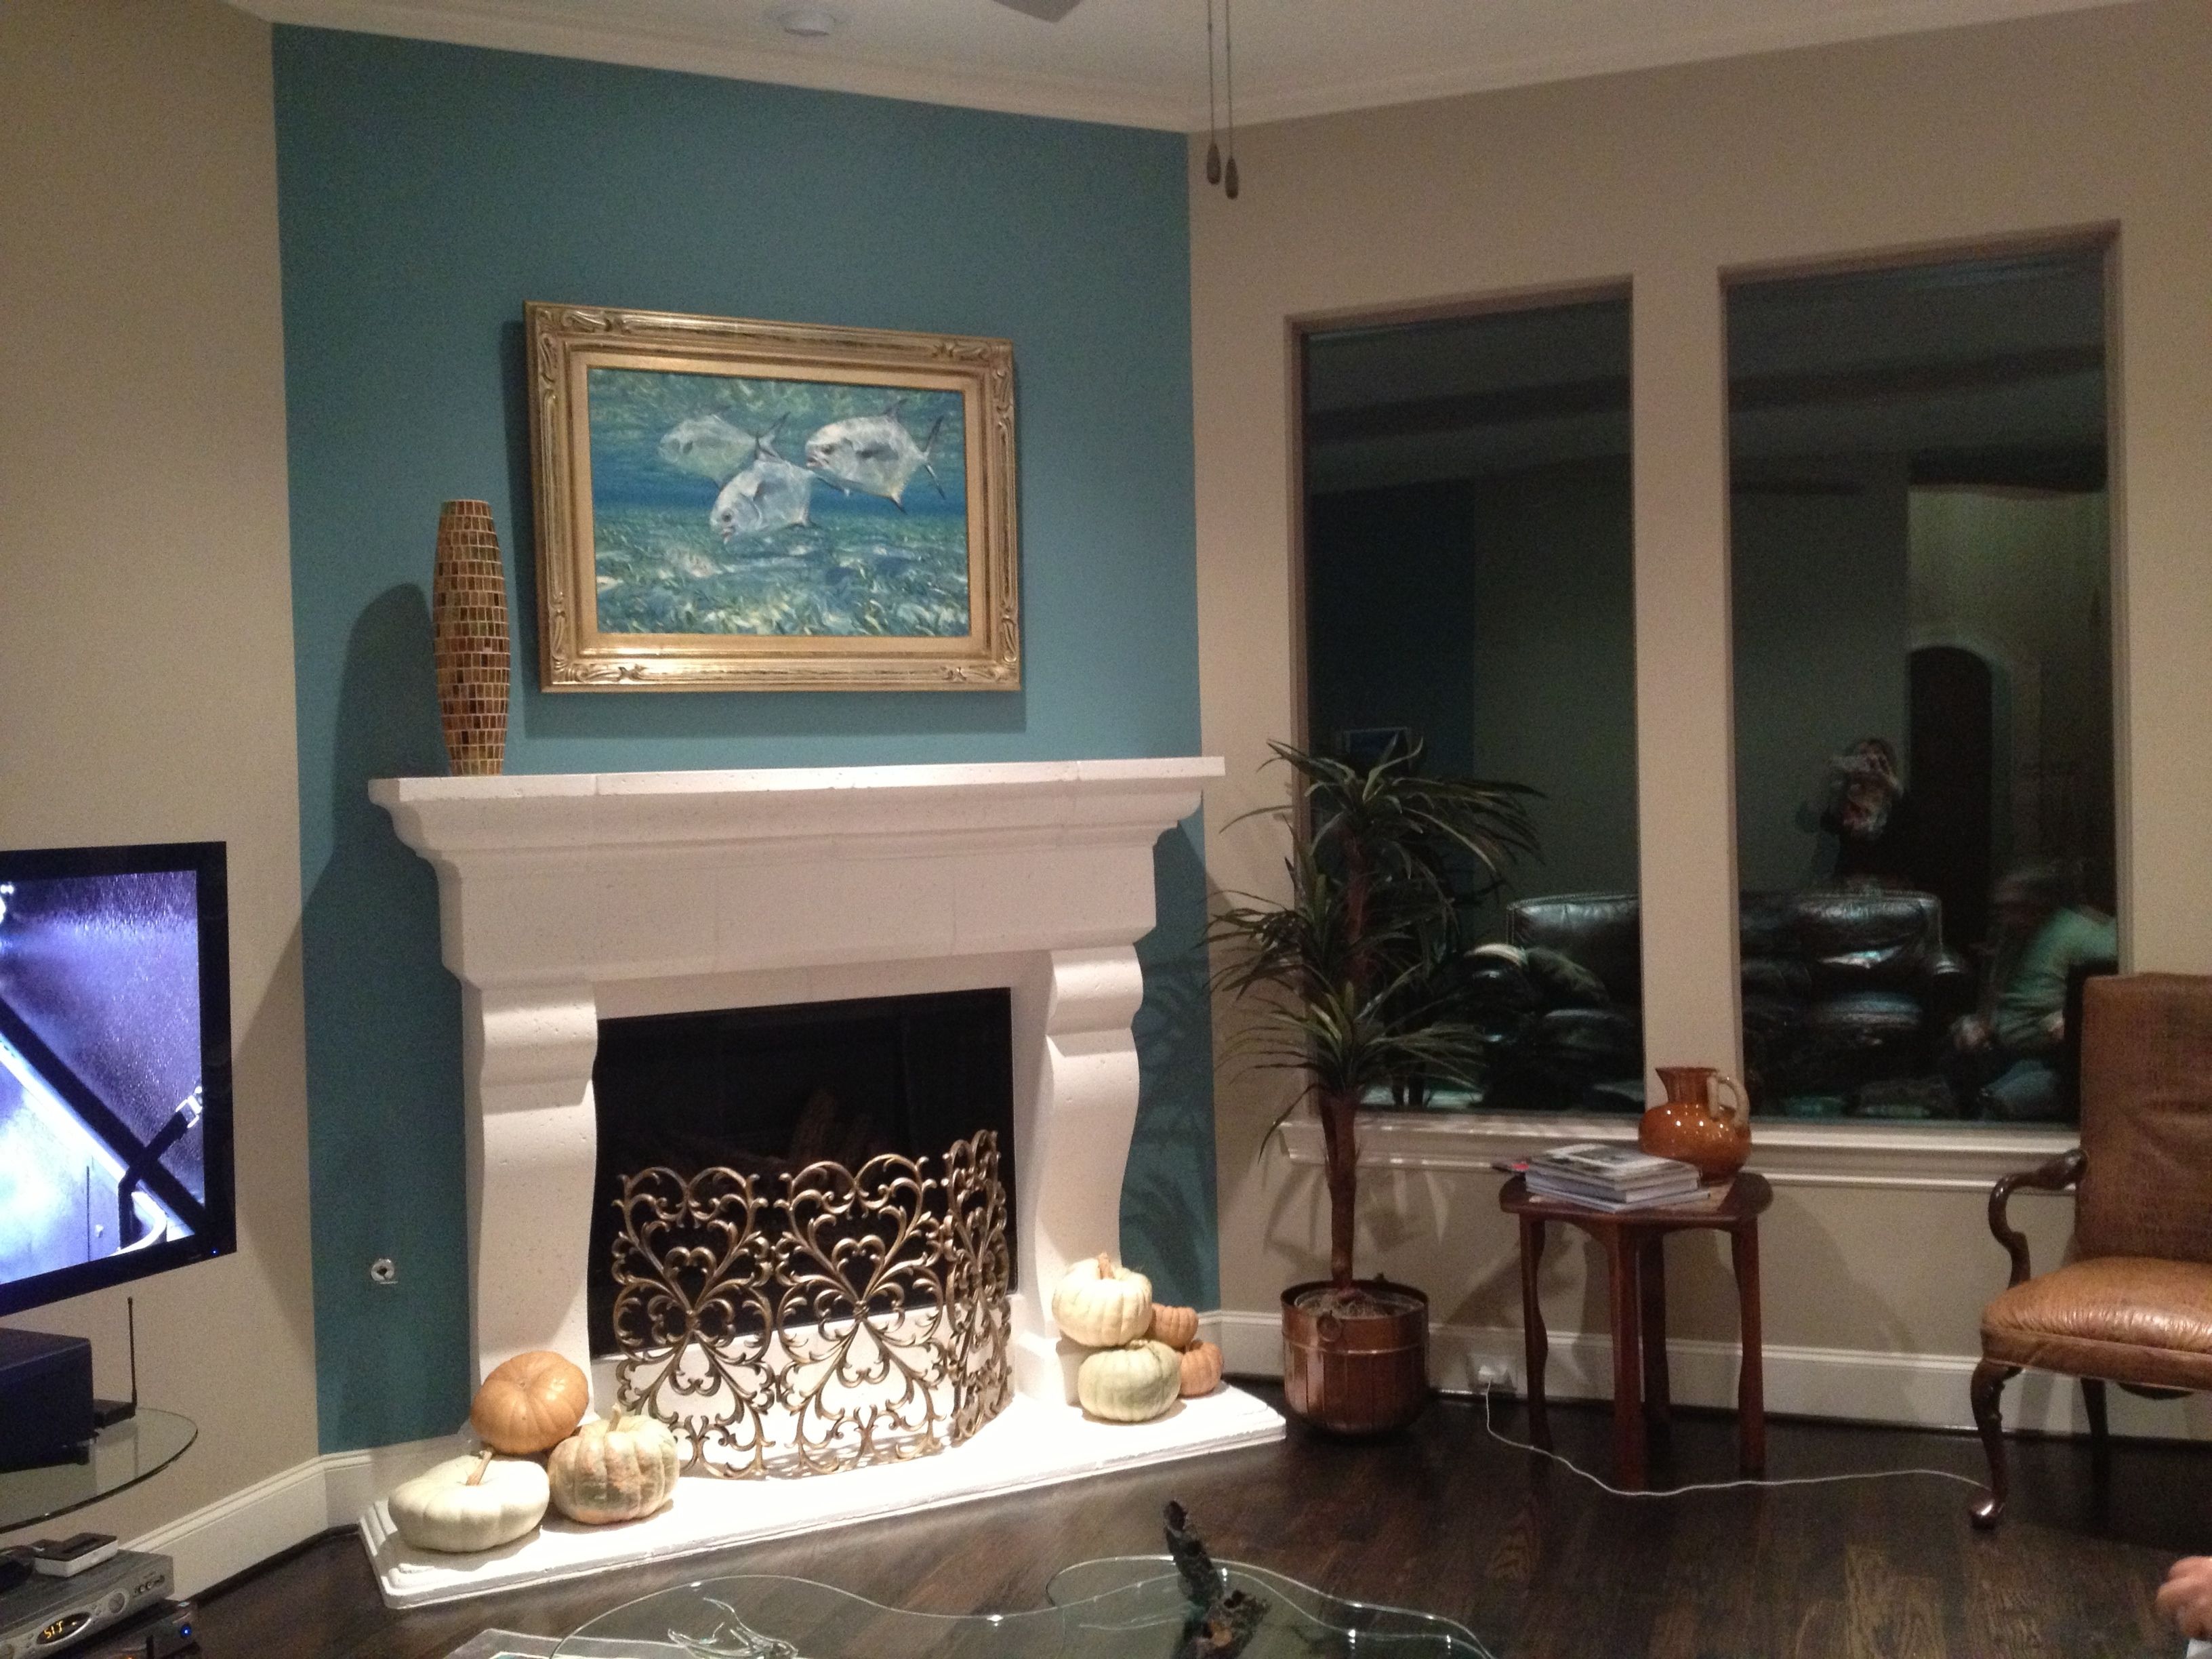 Fireplace Accent Wall Complements Painting (View 1 of 15)